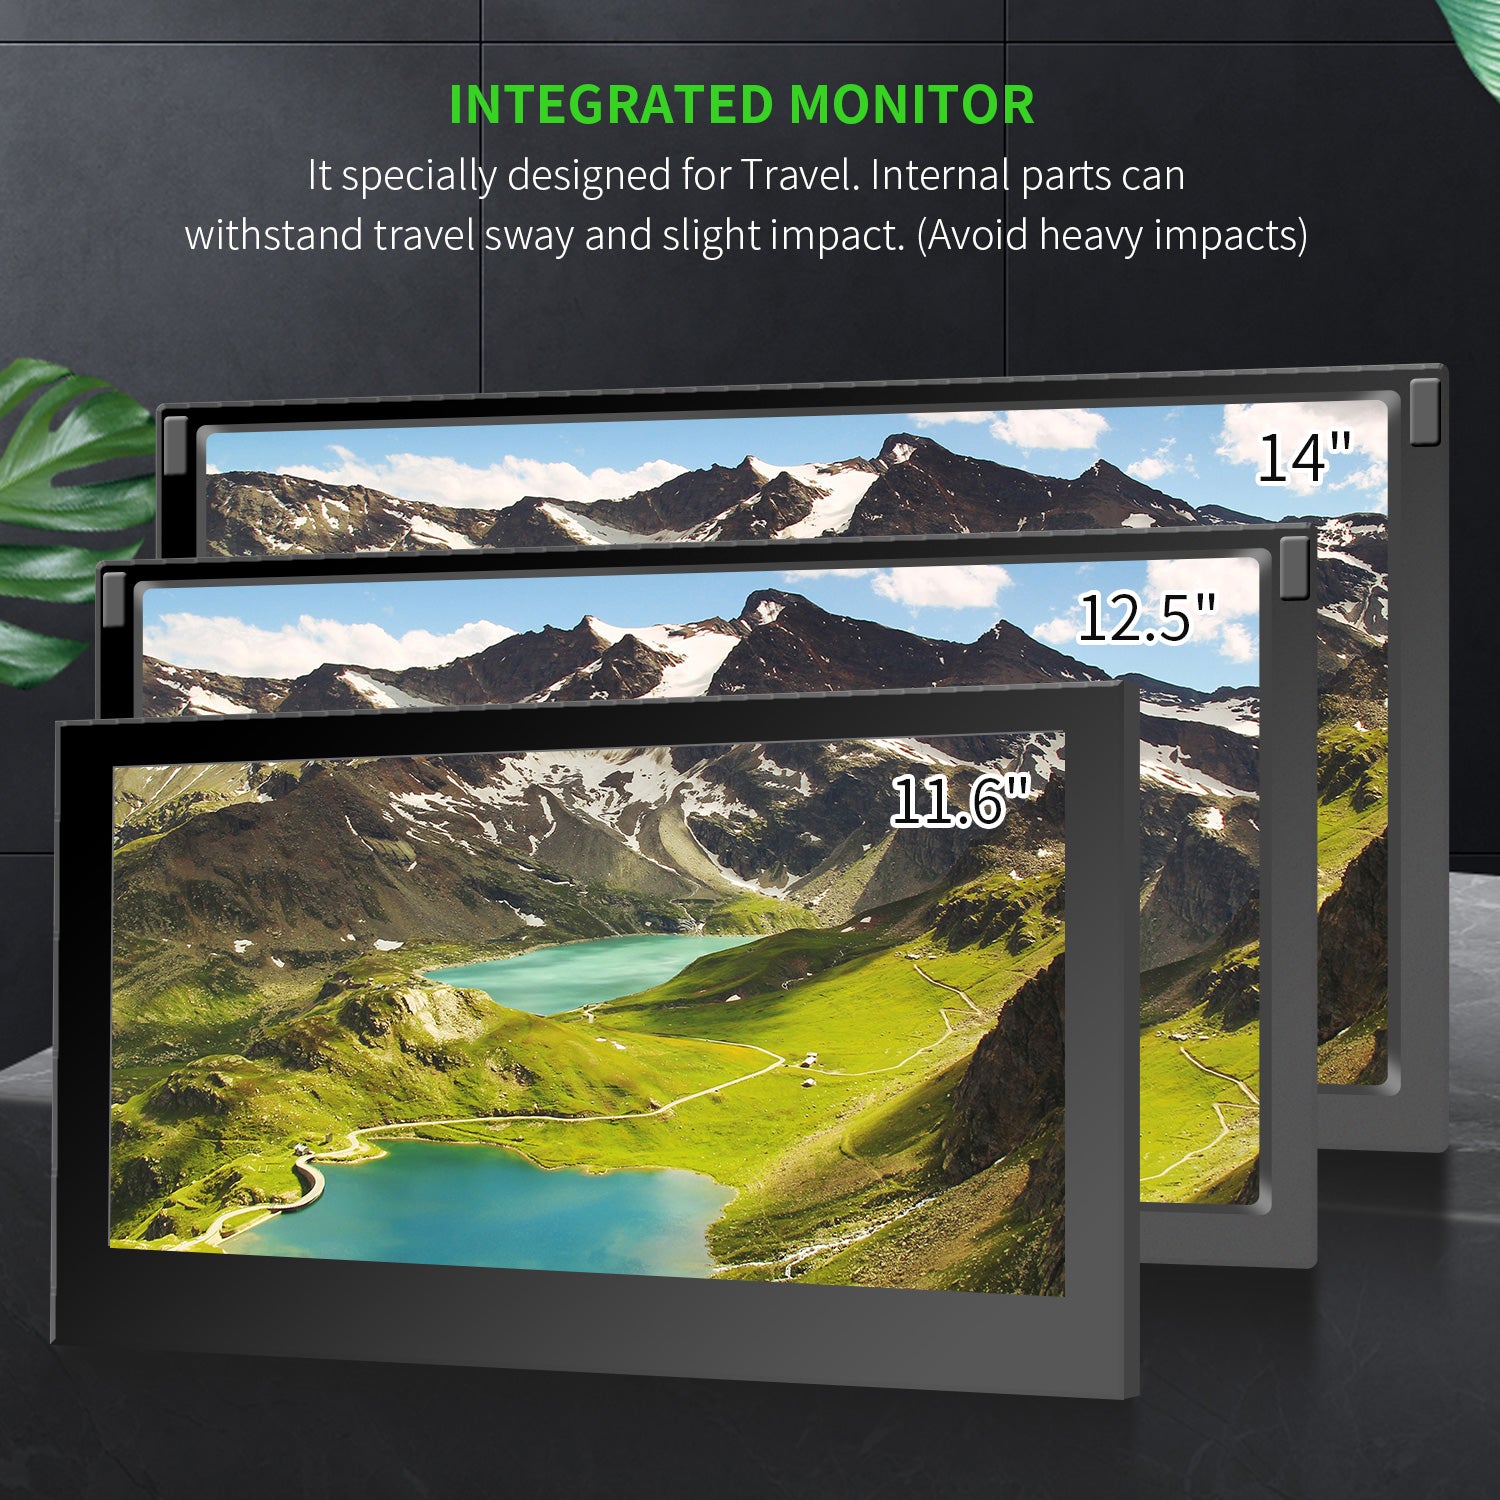 G-STORY 14'' Portable Monitor for Xbox Series X 4K Portable Gaming Monitor  IPS Screen for Xbox Series S（not Included） with Two HDMI, HDR, Freesync